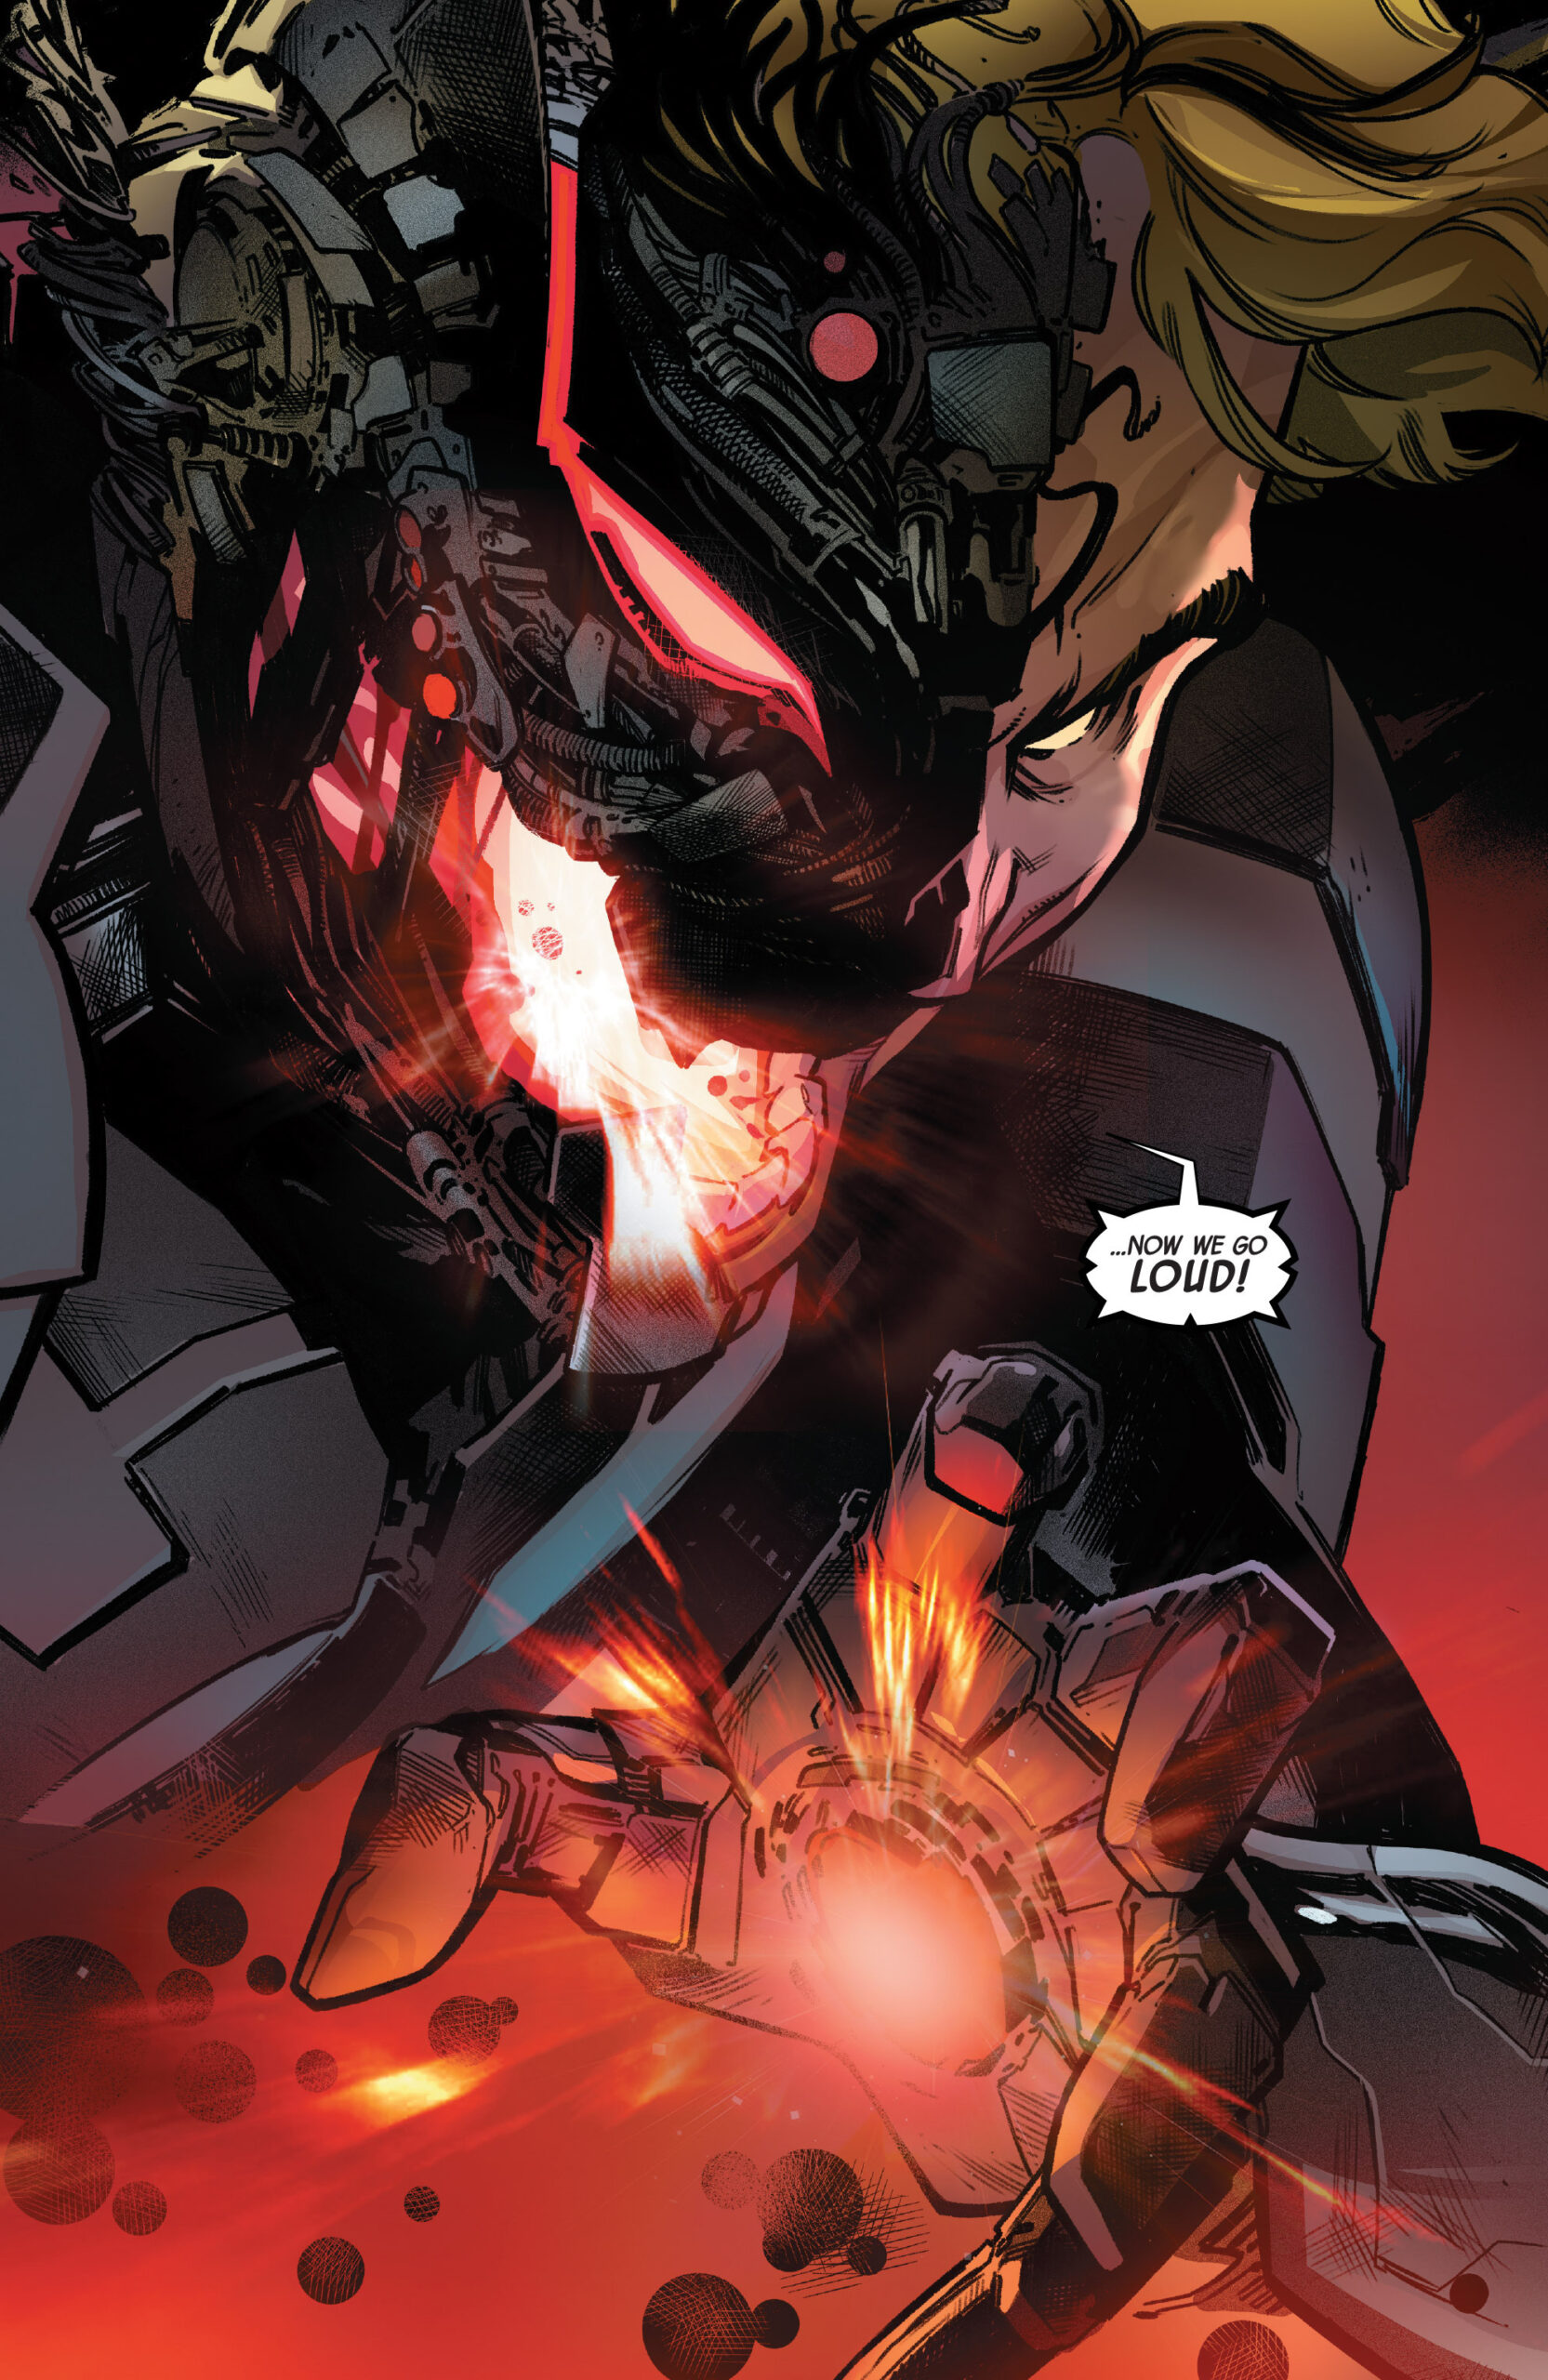 Ultron reveals himself as having taken over Hank Pym in Uncanny Avengers Vol. 3 #10 "Who Are You Wearing?" (2016), Marvel Comics. Words by Gerry Duggan, art by Pepe Larraz, David Curiel, and Clayton Cowles.